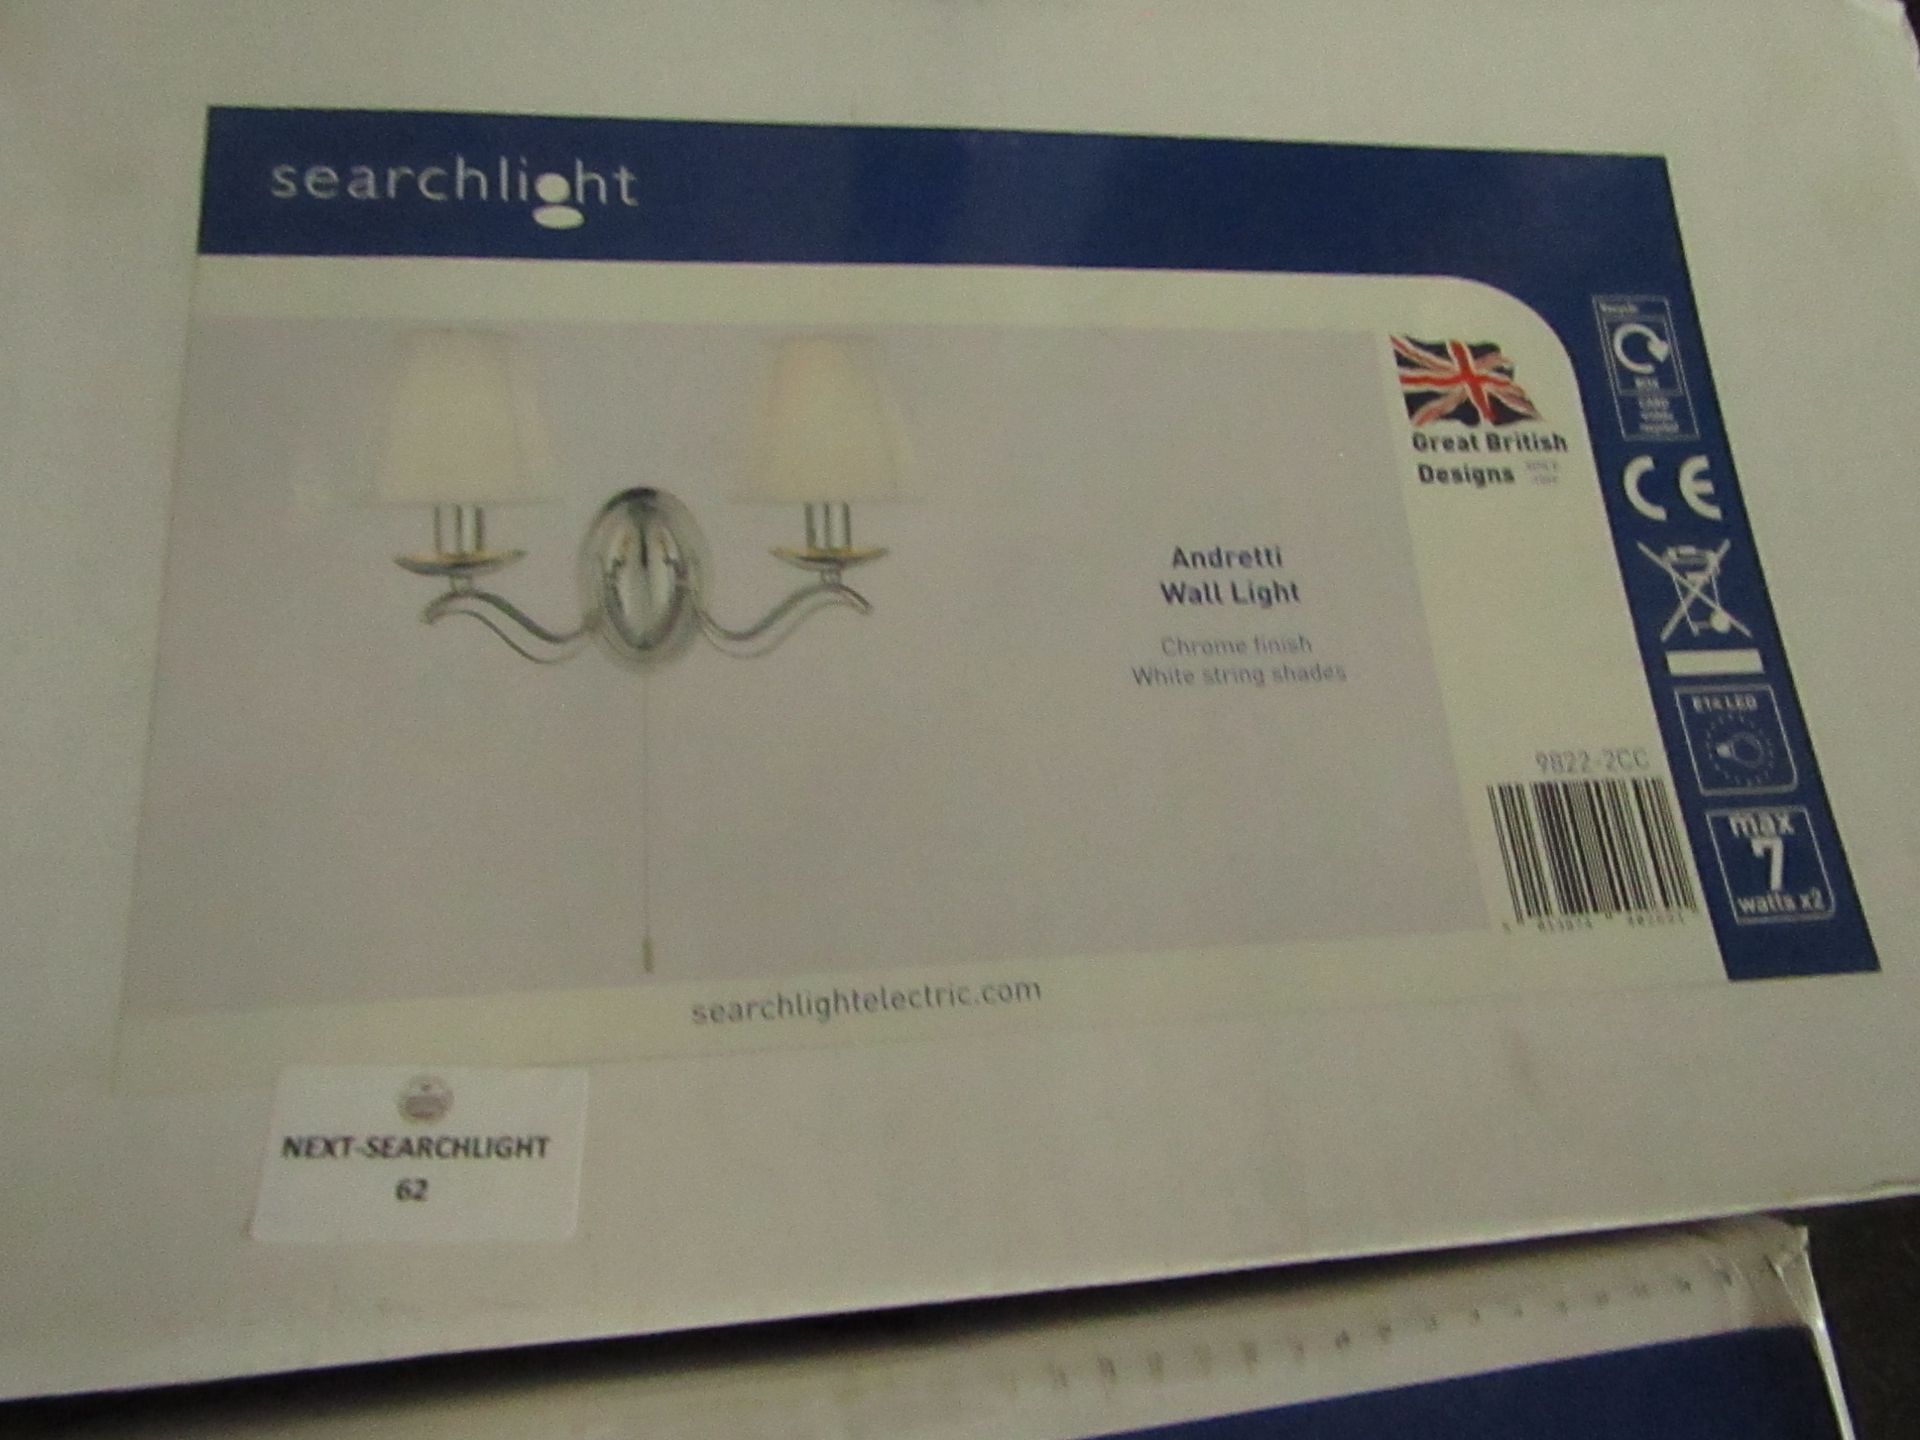 Searchlight Andretti - 2lt Wall Bracket Chrome White String Shades RRP ô?40.00 - This lot contains - Image 2 of 2